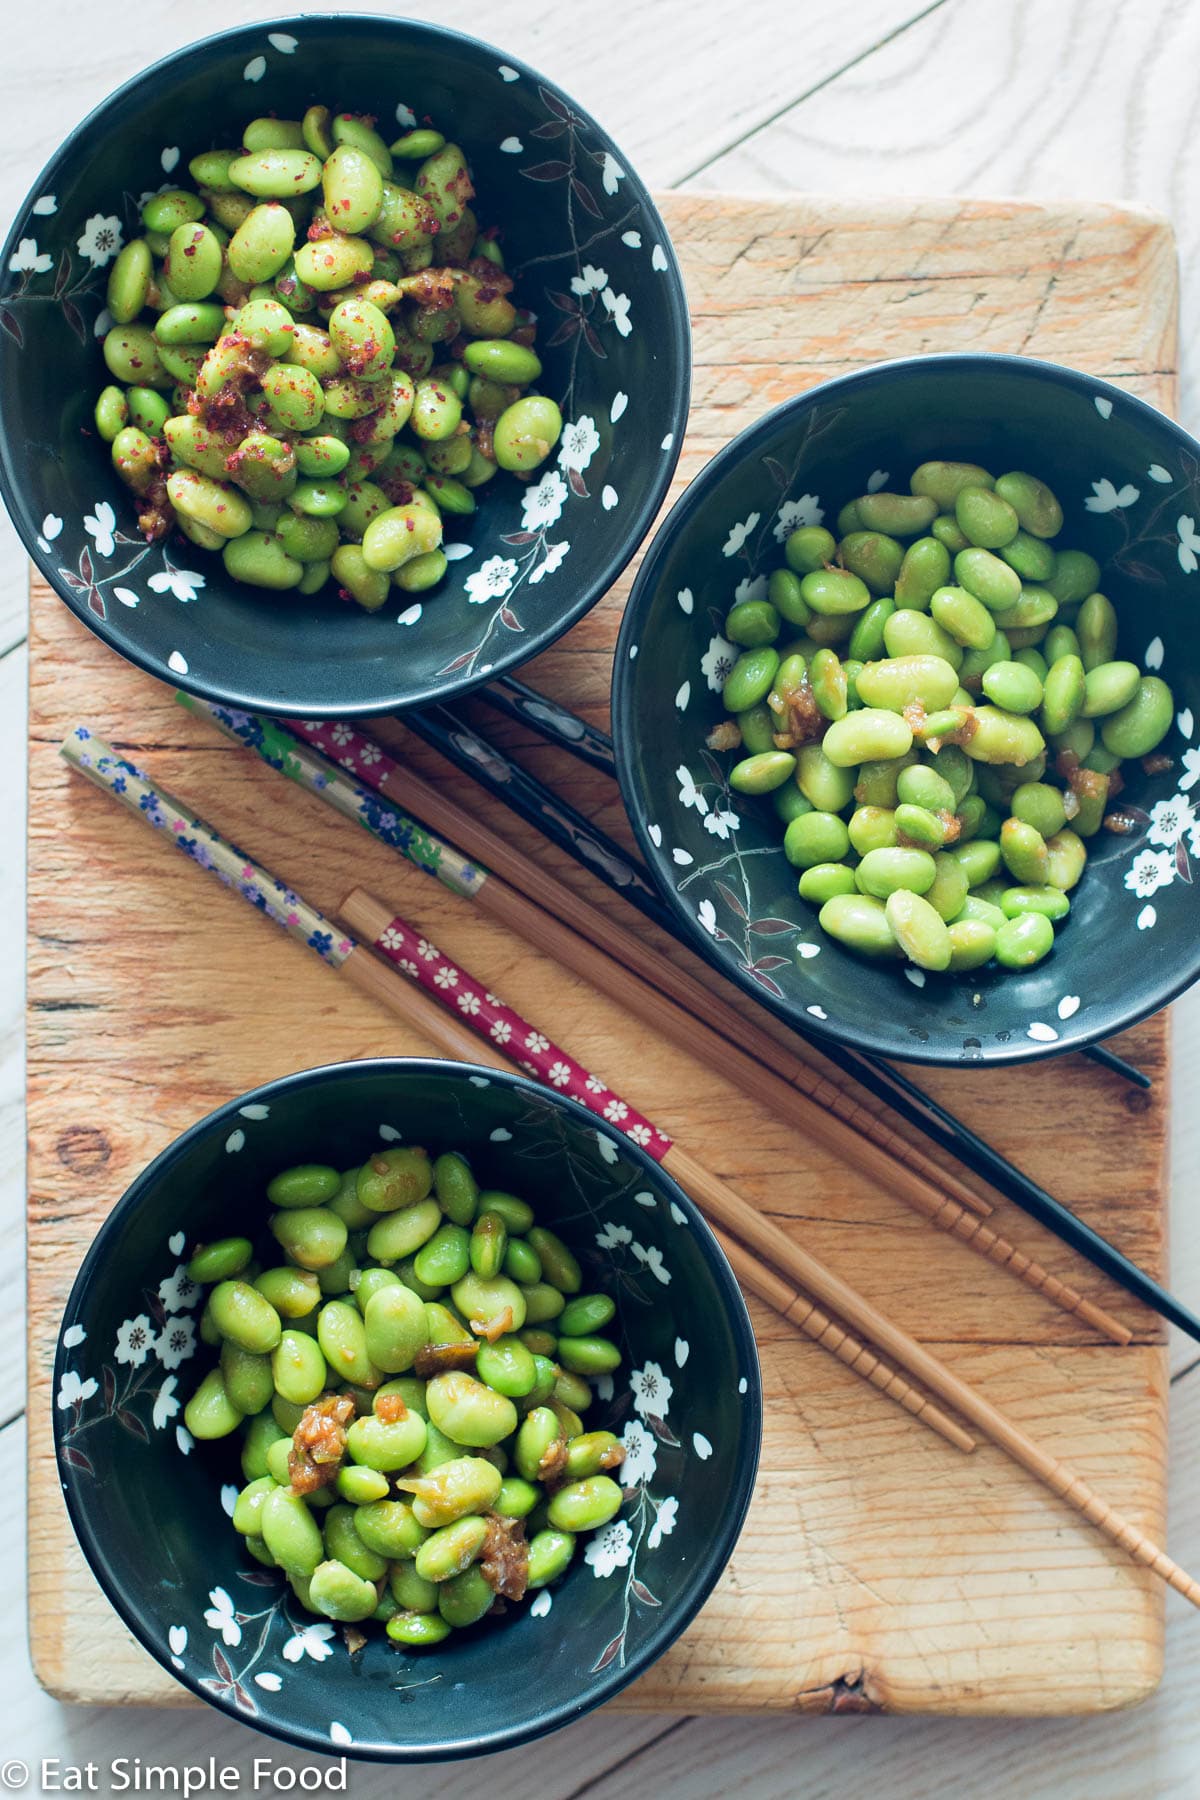 Top view of 3 black bowls of edamame with ginger and soy sauce on a wood cutting board with 3 sets of chopsticks.